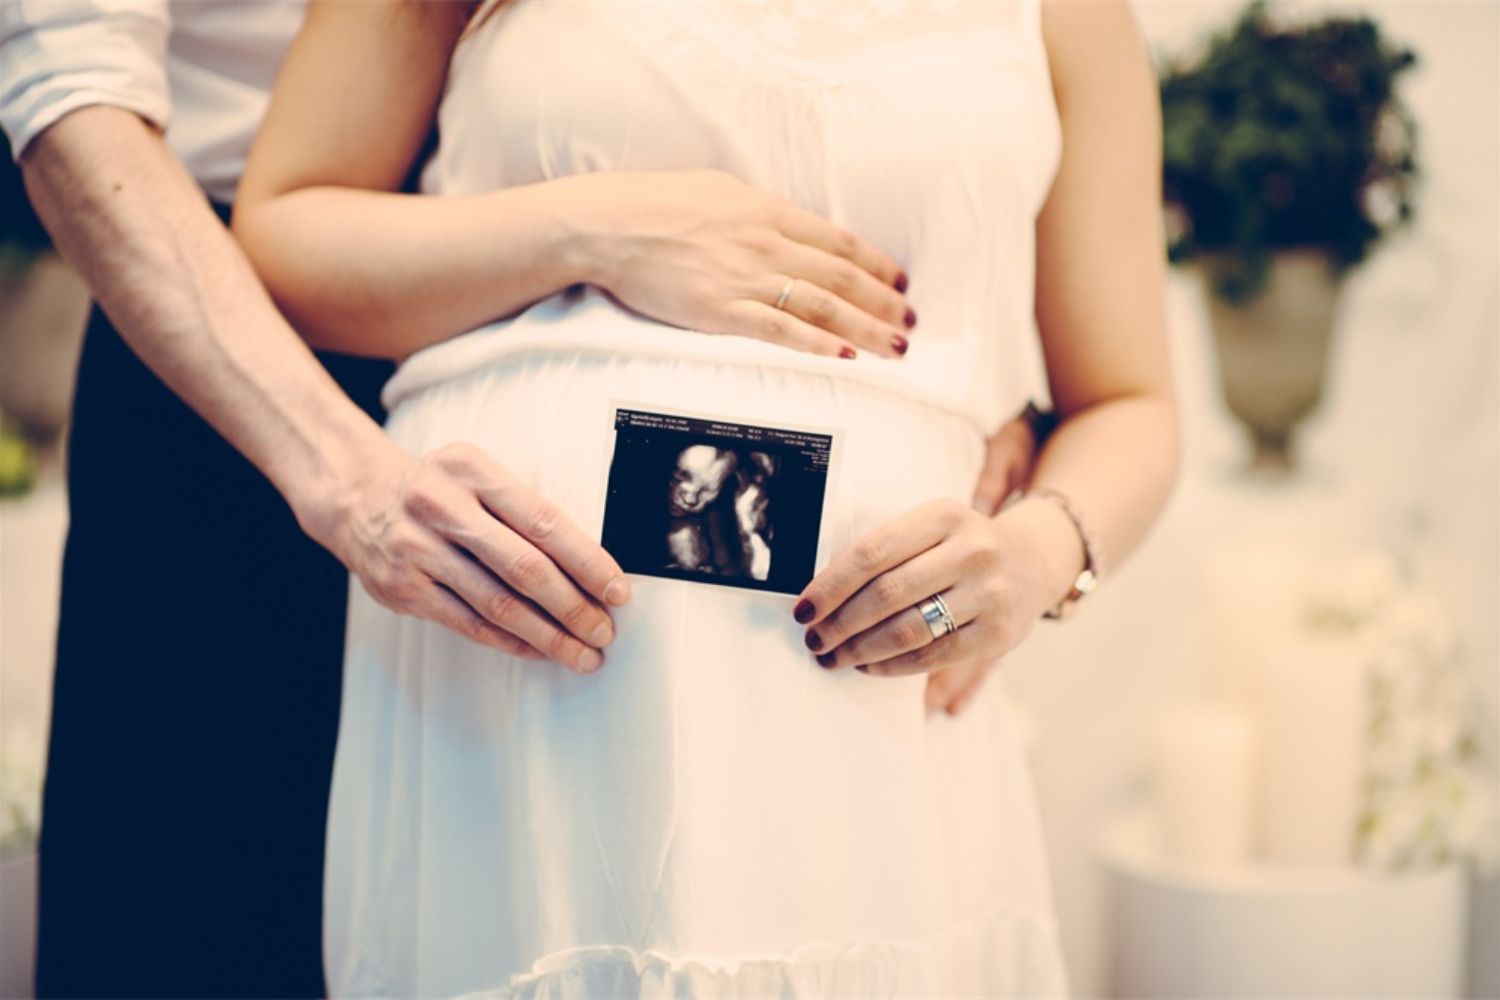 What Should Your Family Wear for Maternity Photos | Niagara - Reflections  by Karen Byker